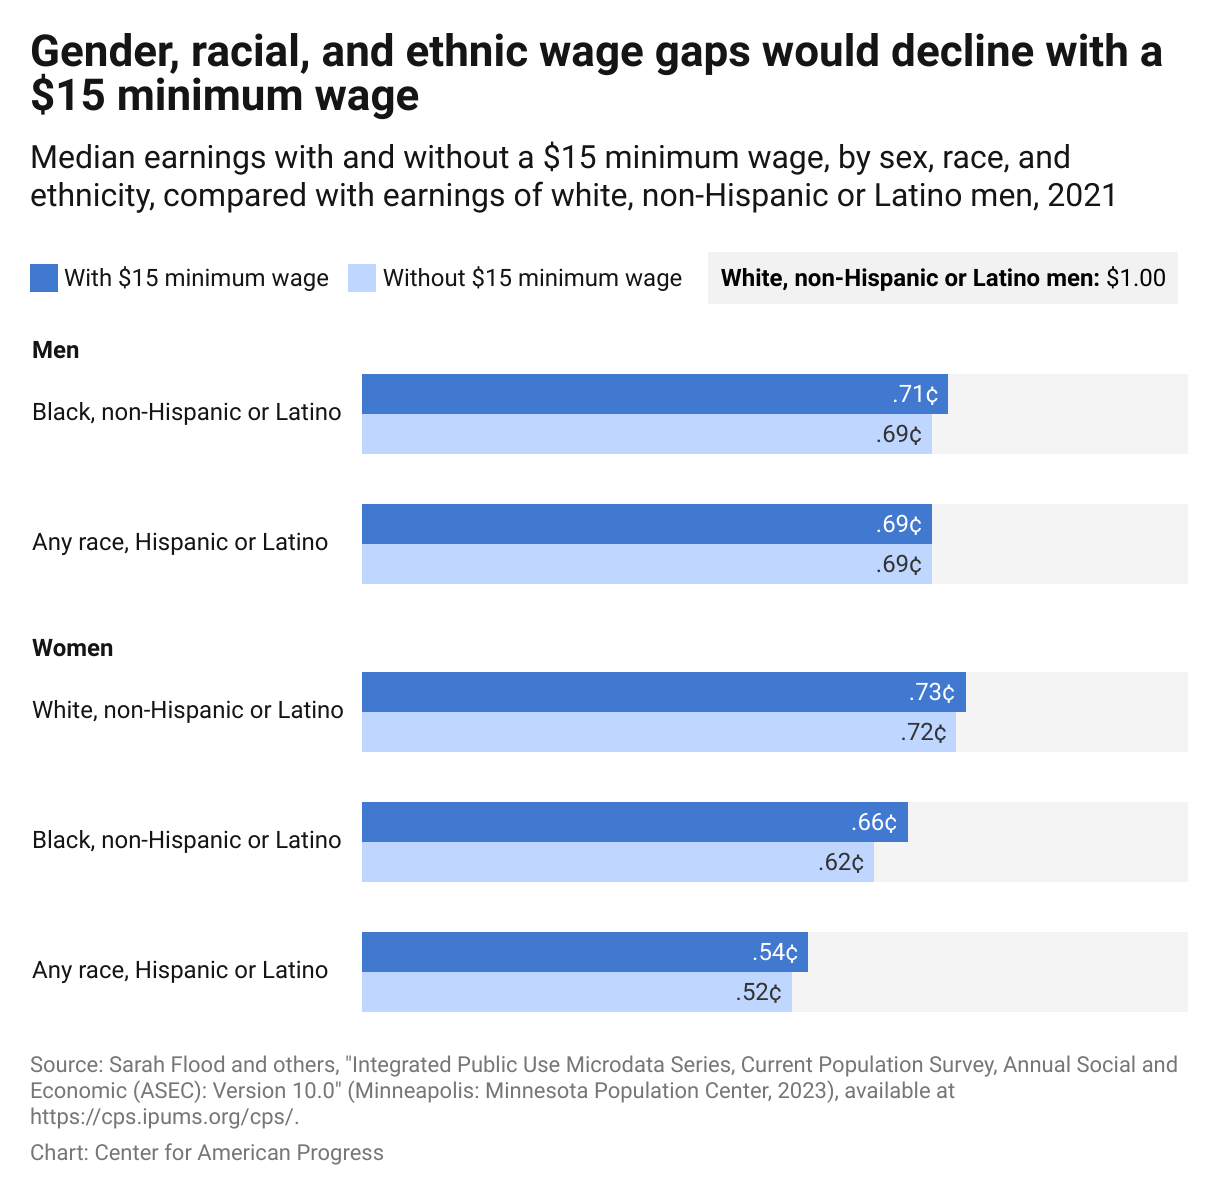 Grouped bar char showing that in 2021 Black women and Latinas would have seen the largest declines in their wage gaps with a $15 minimum wage.   